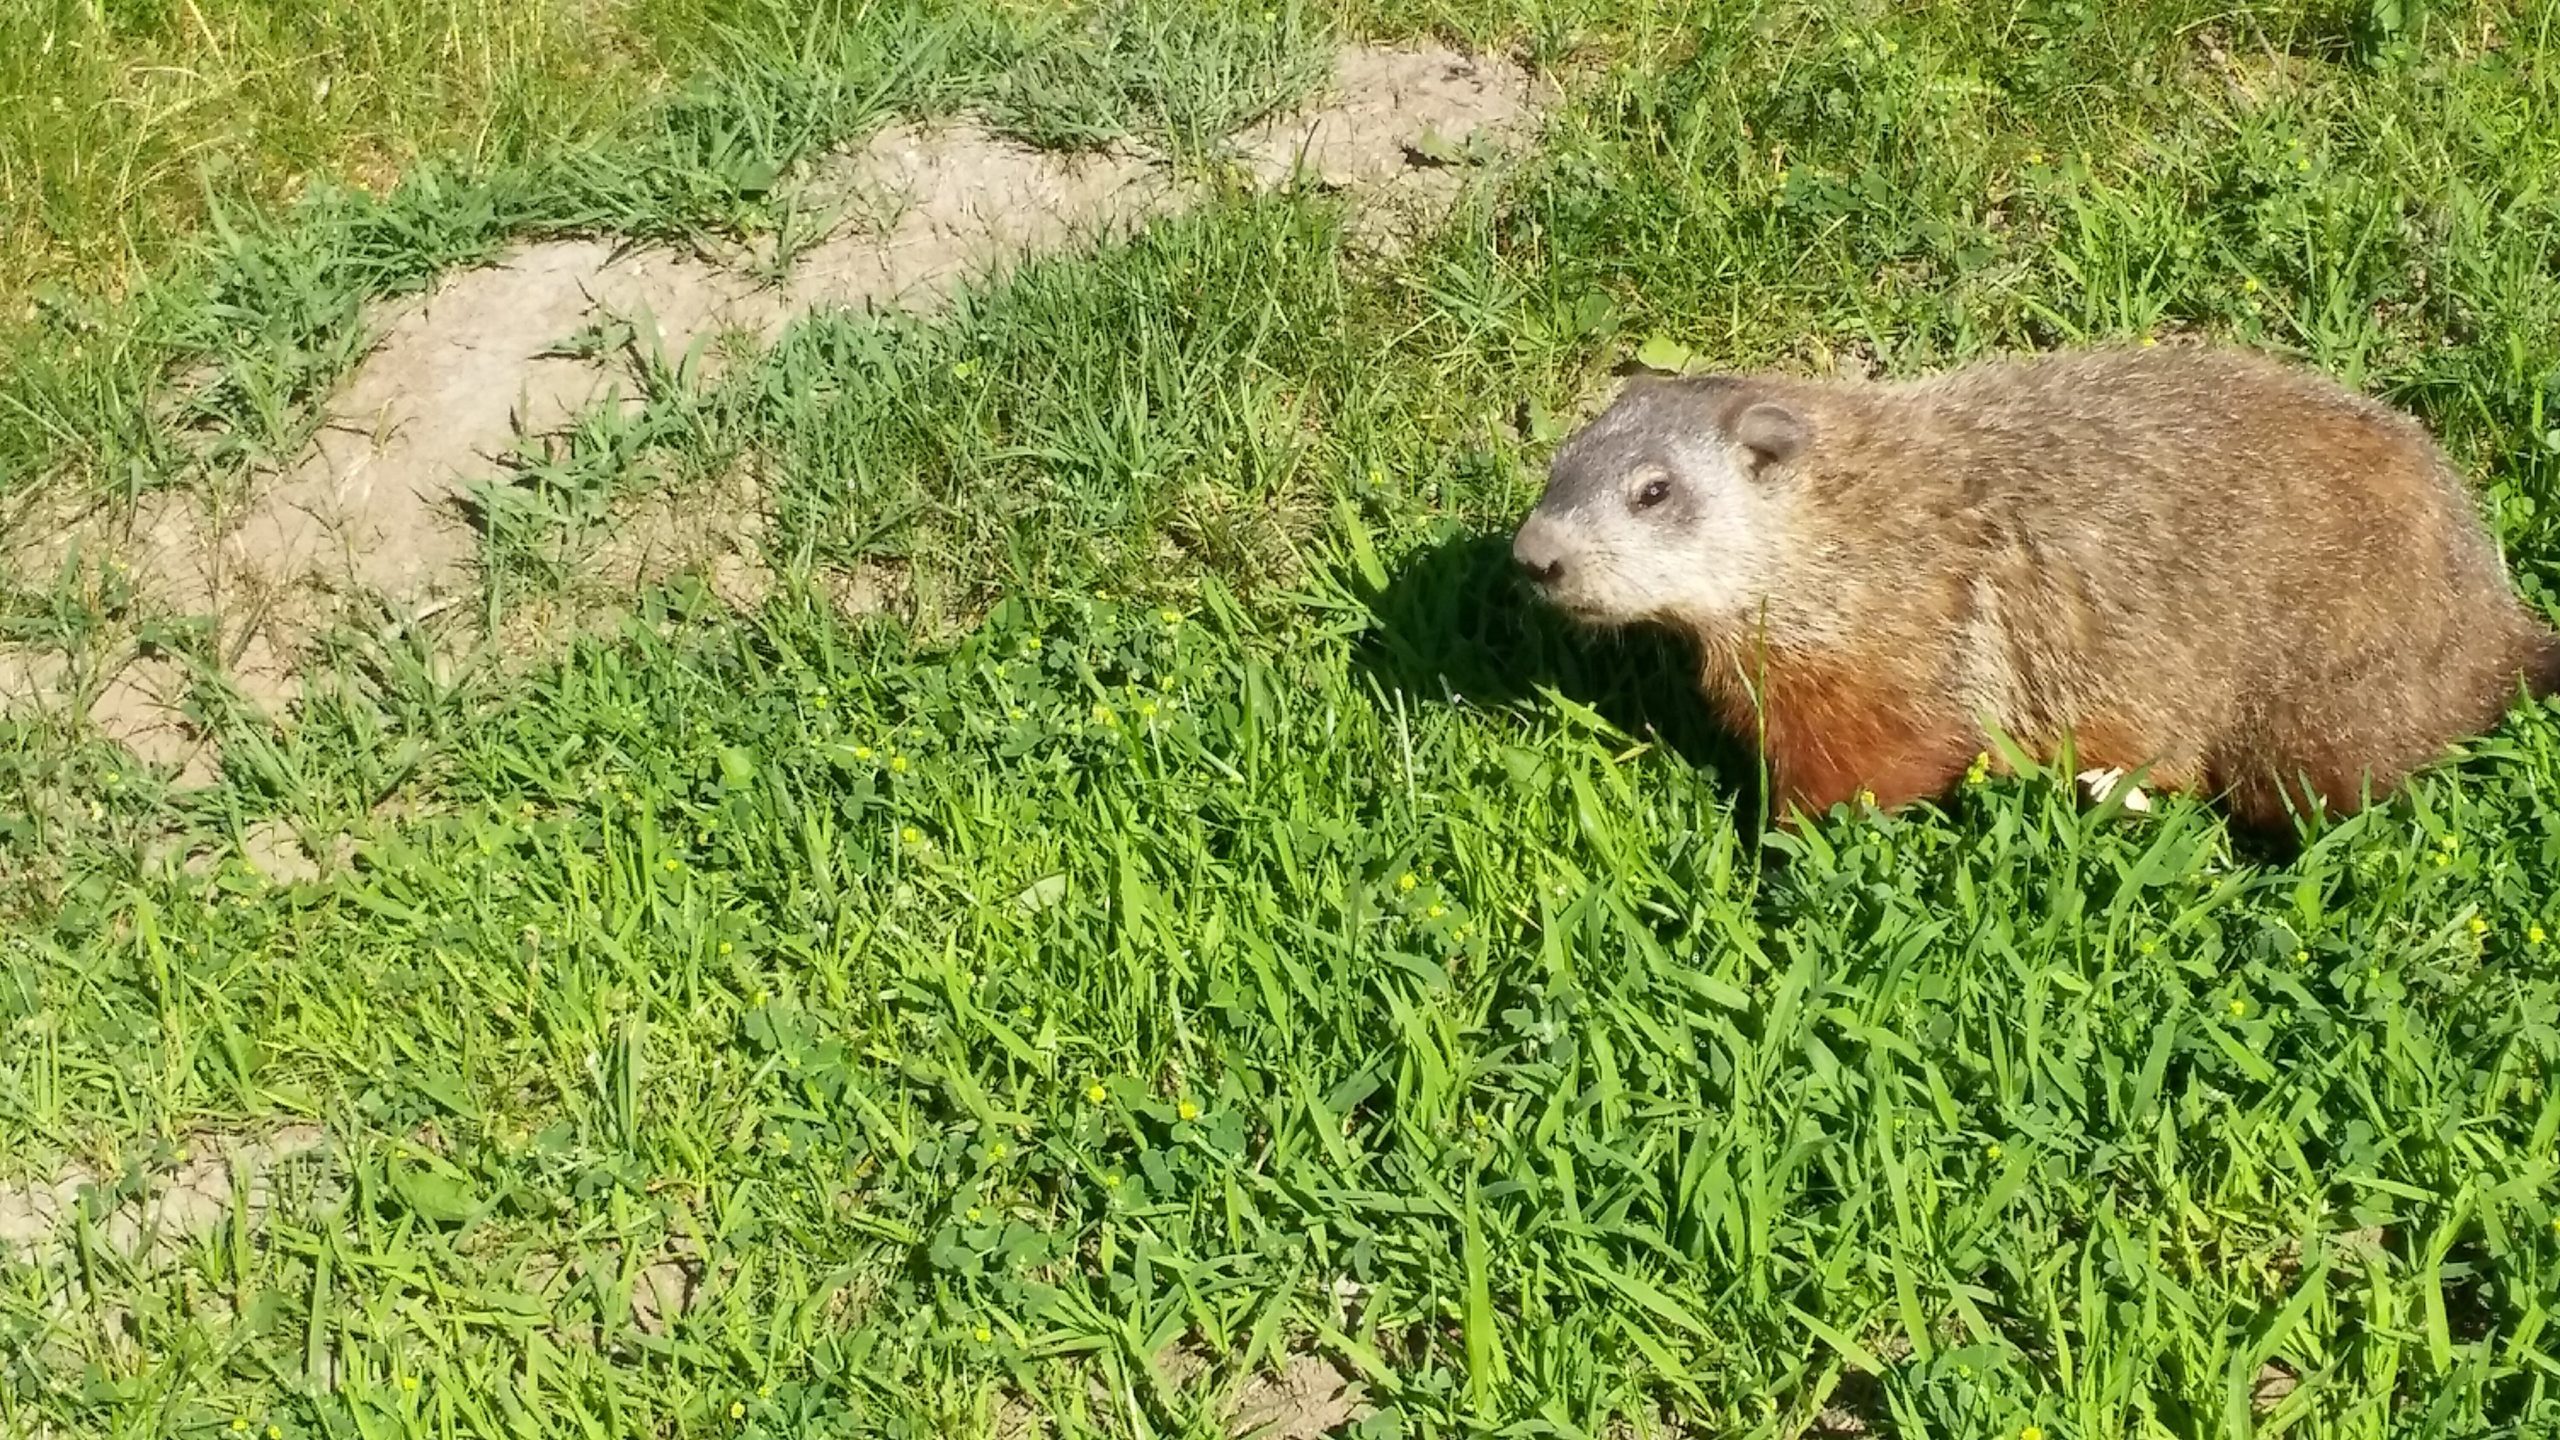 Happy Groundhog Day! Canada’s 2 Famous Groundhogs Are Giving Us Mixed Results This Year..